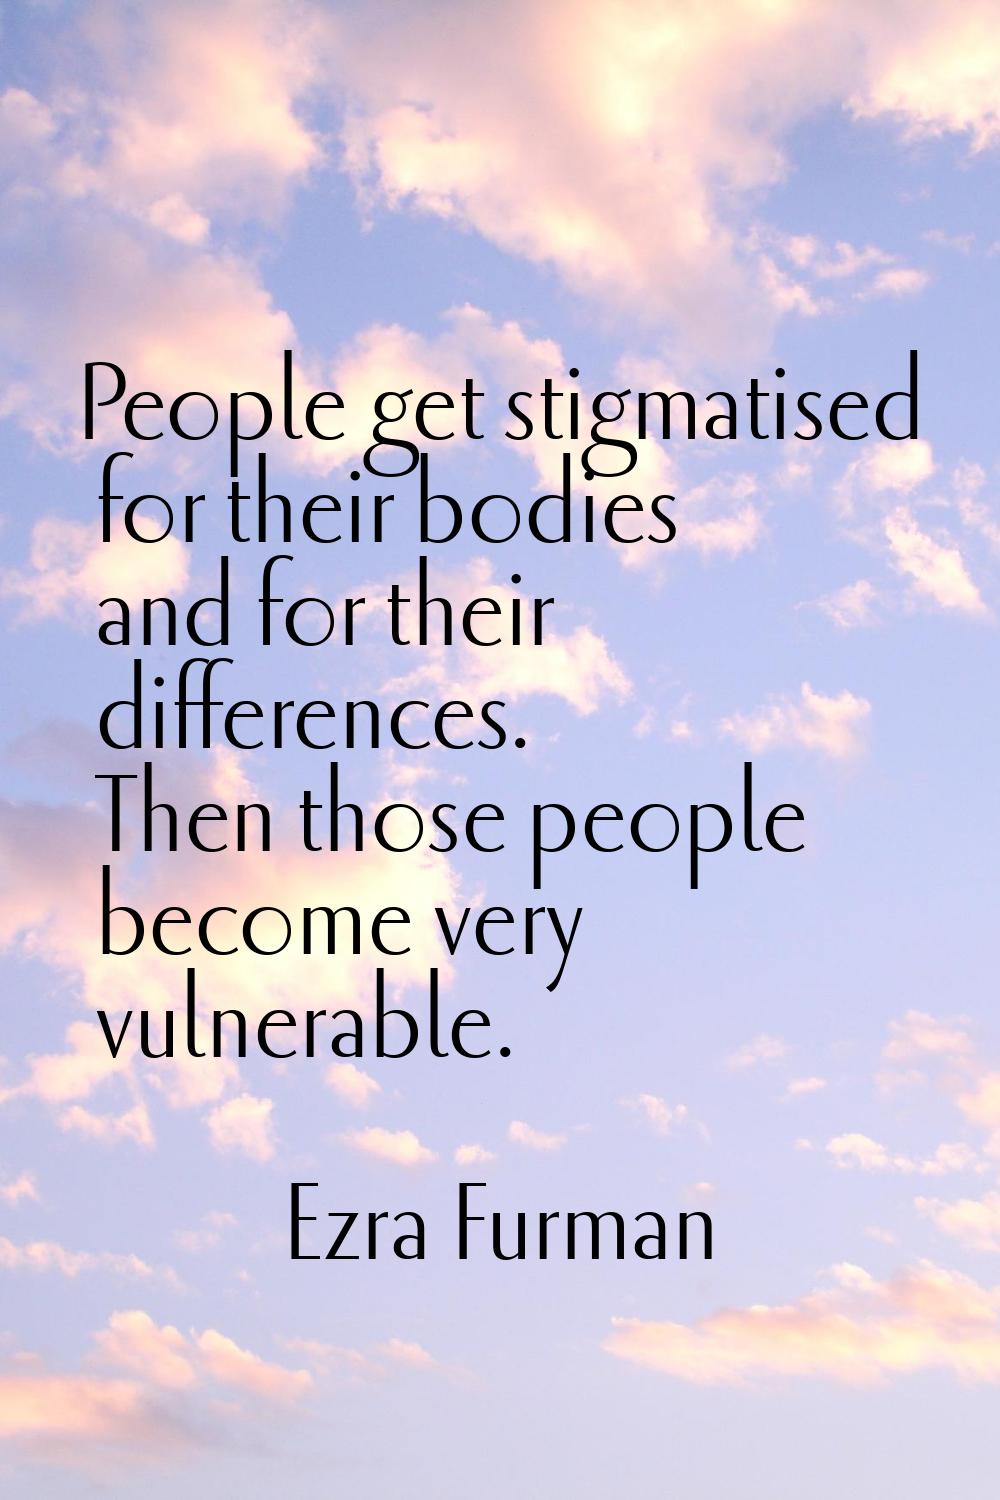 People get stigmatised for their bodies and for their differences. Then those people become very vu